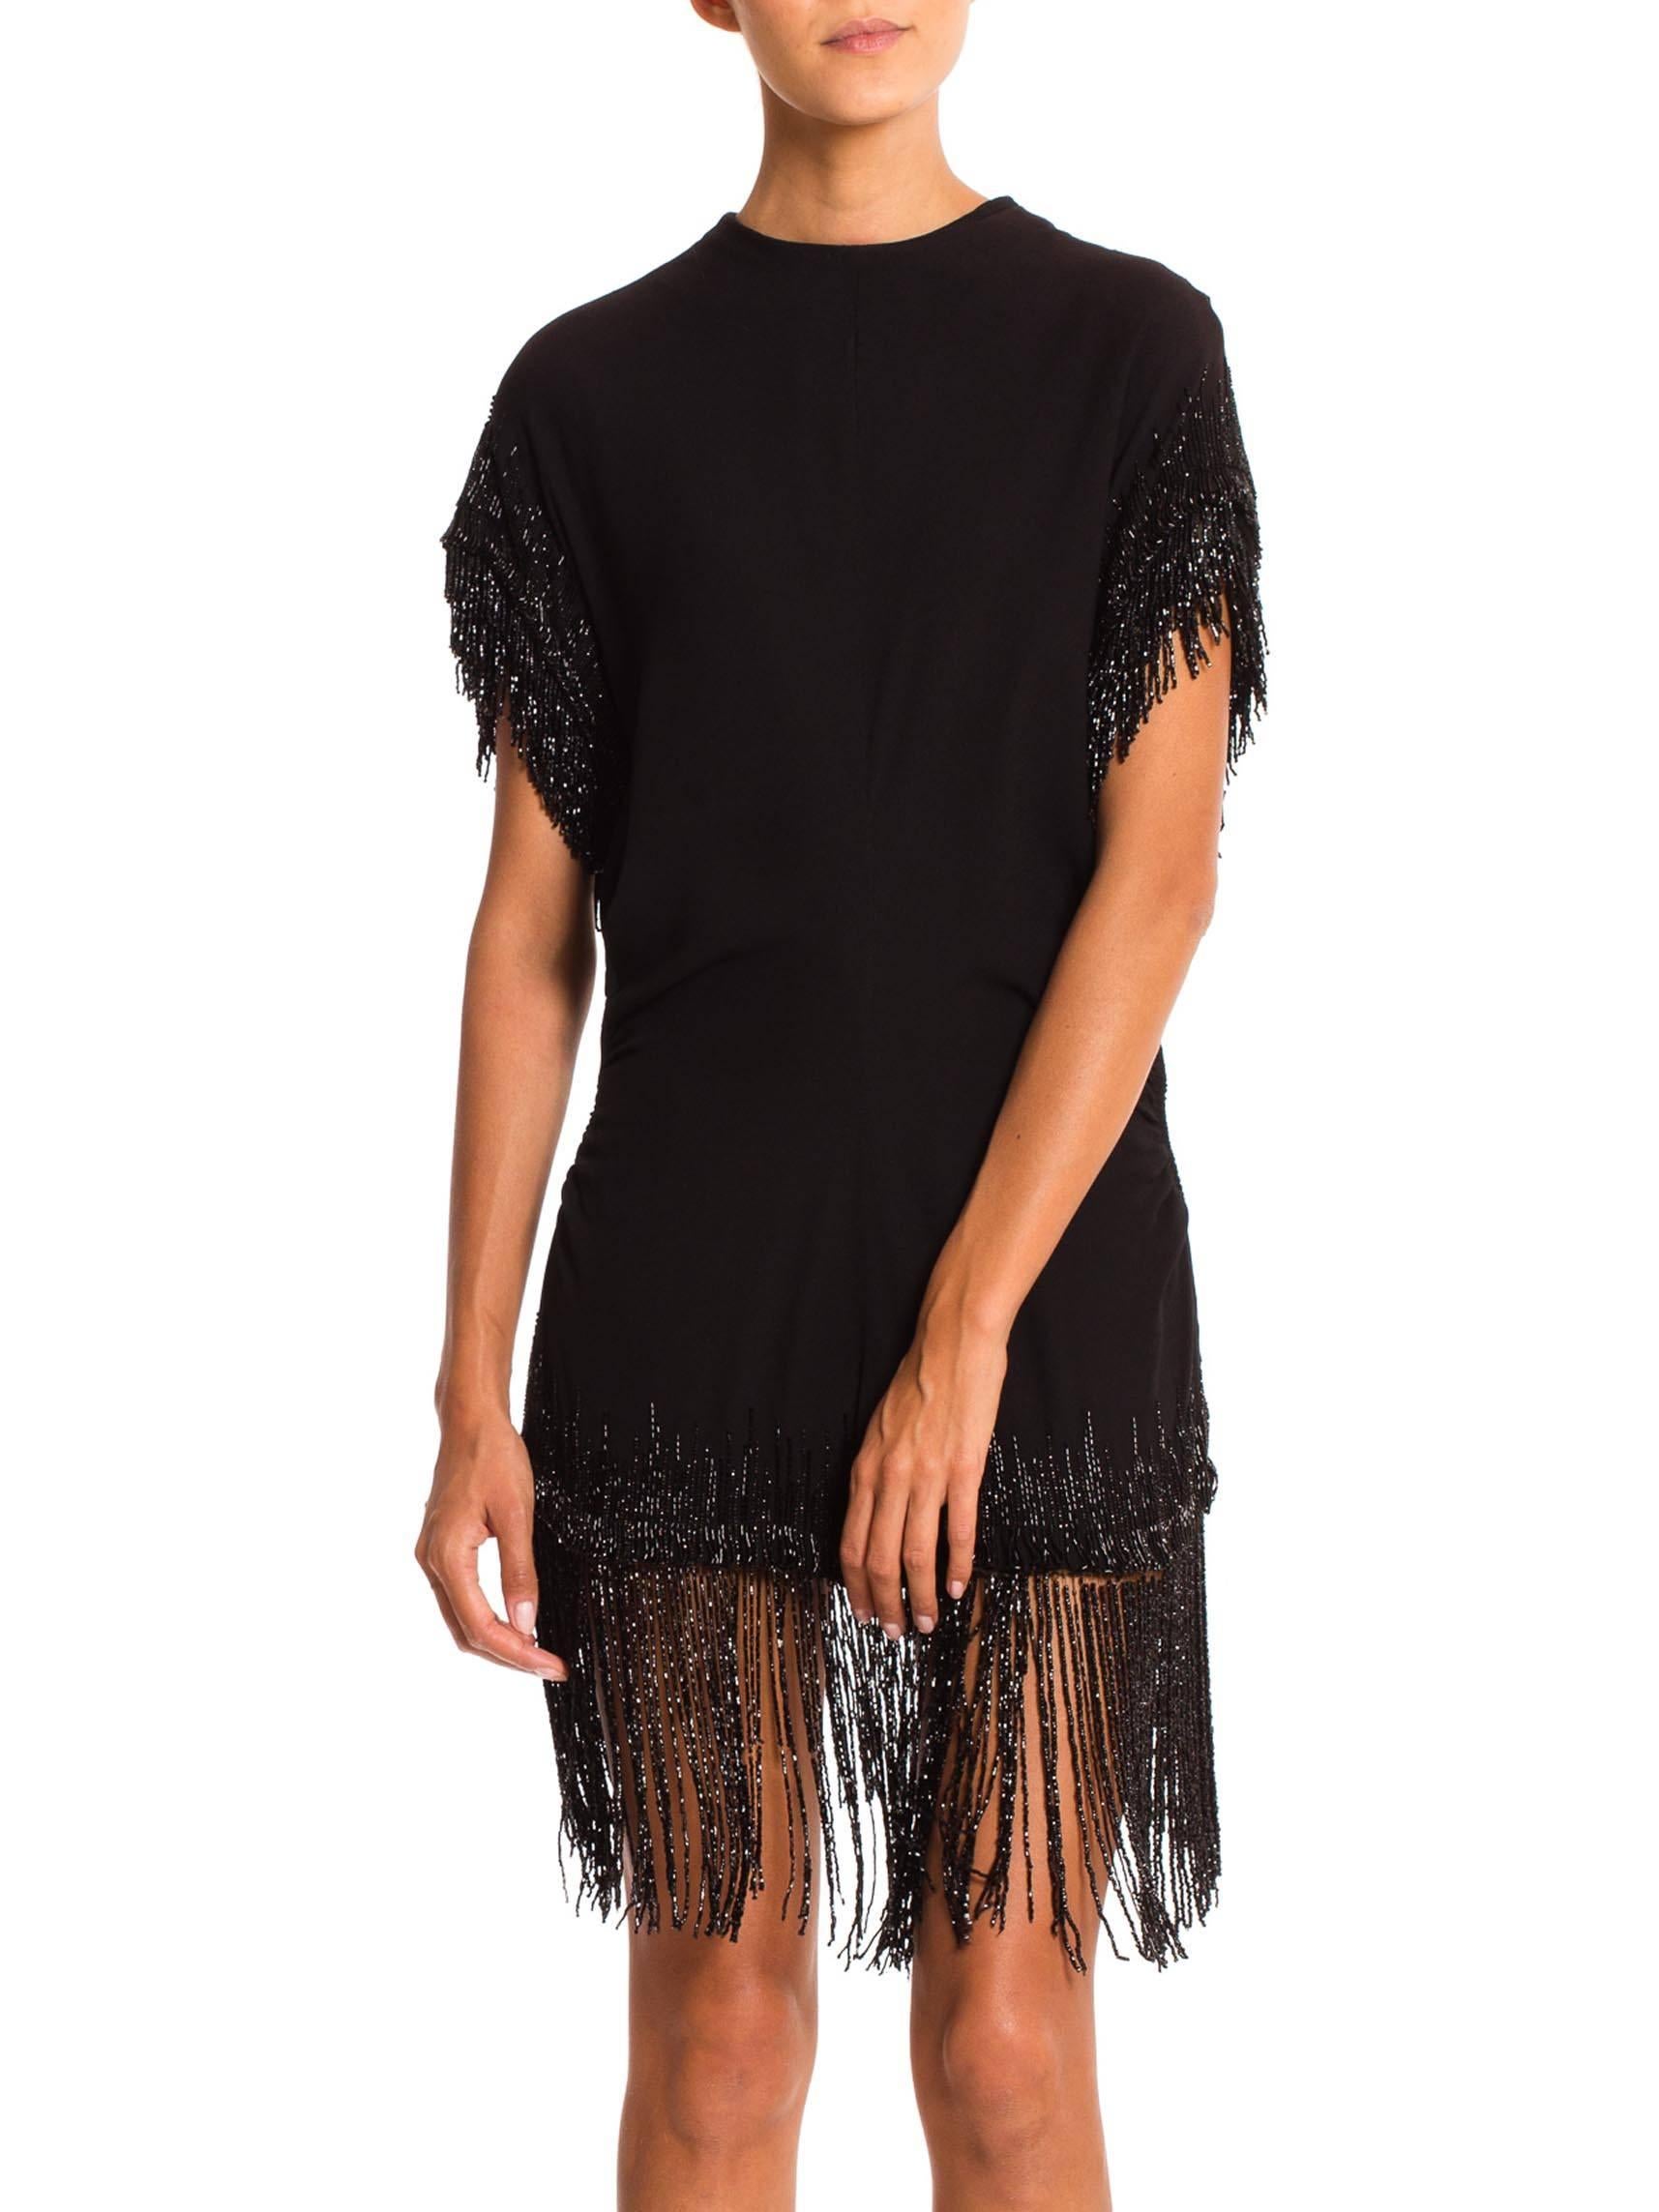 Gorgeous trails of beaded fringe come up the hem lines of this piece in an almost ombré tecnique. Meant to be worn over a full skirt in it's day it would work gorgeously over a pair of both slim as well as full trousers, try it with jeans even. Old